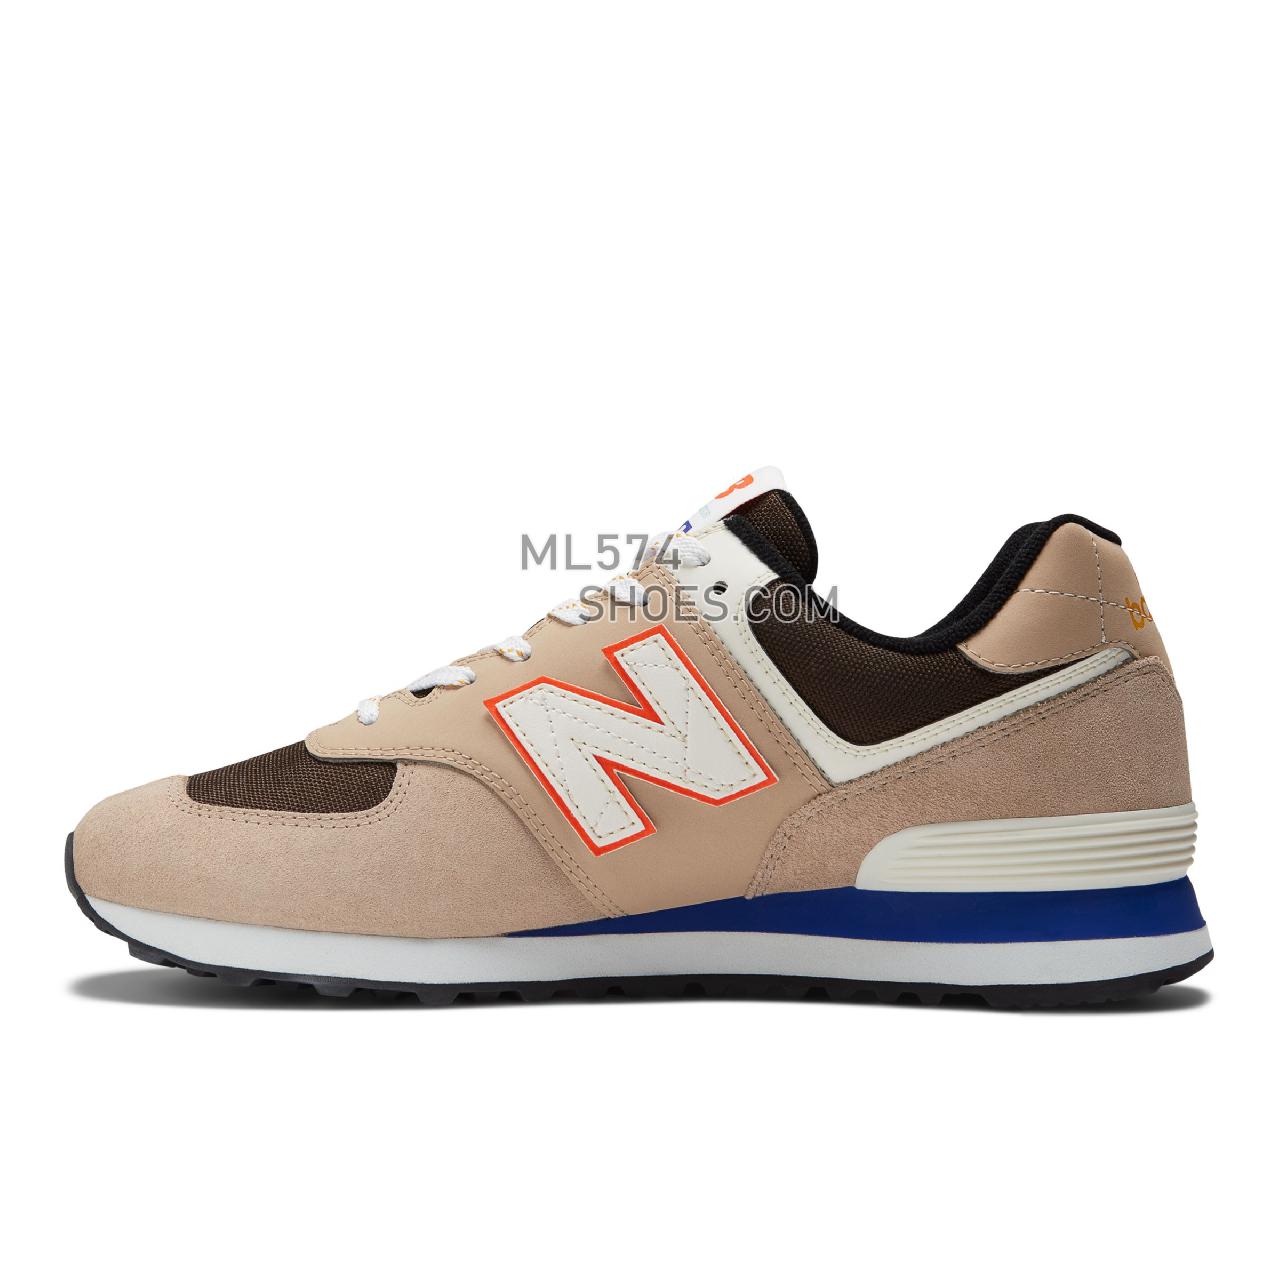 New Balance 574v2 - Men's Classic Sneakers - Mindful Grey with Poppy - ML574HQ2